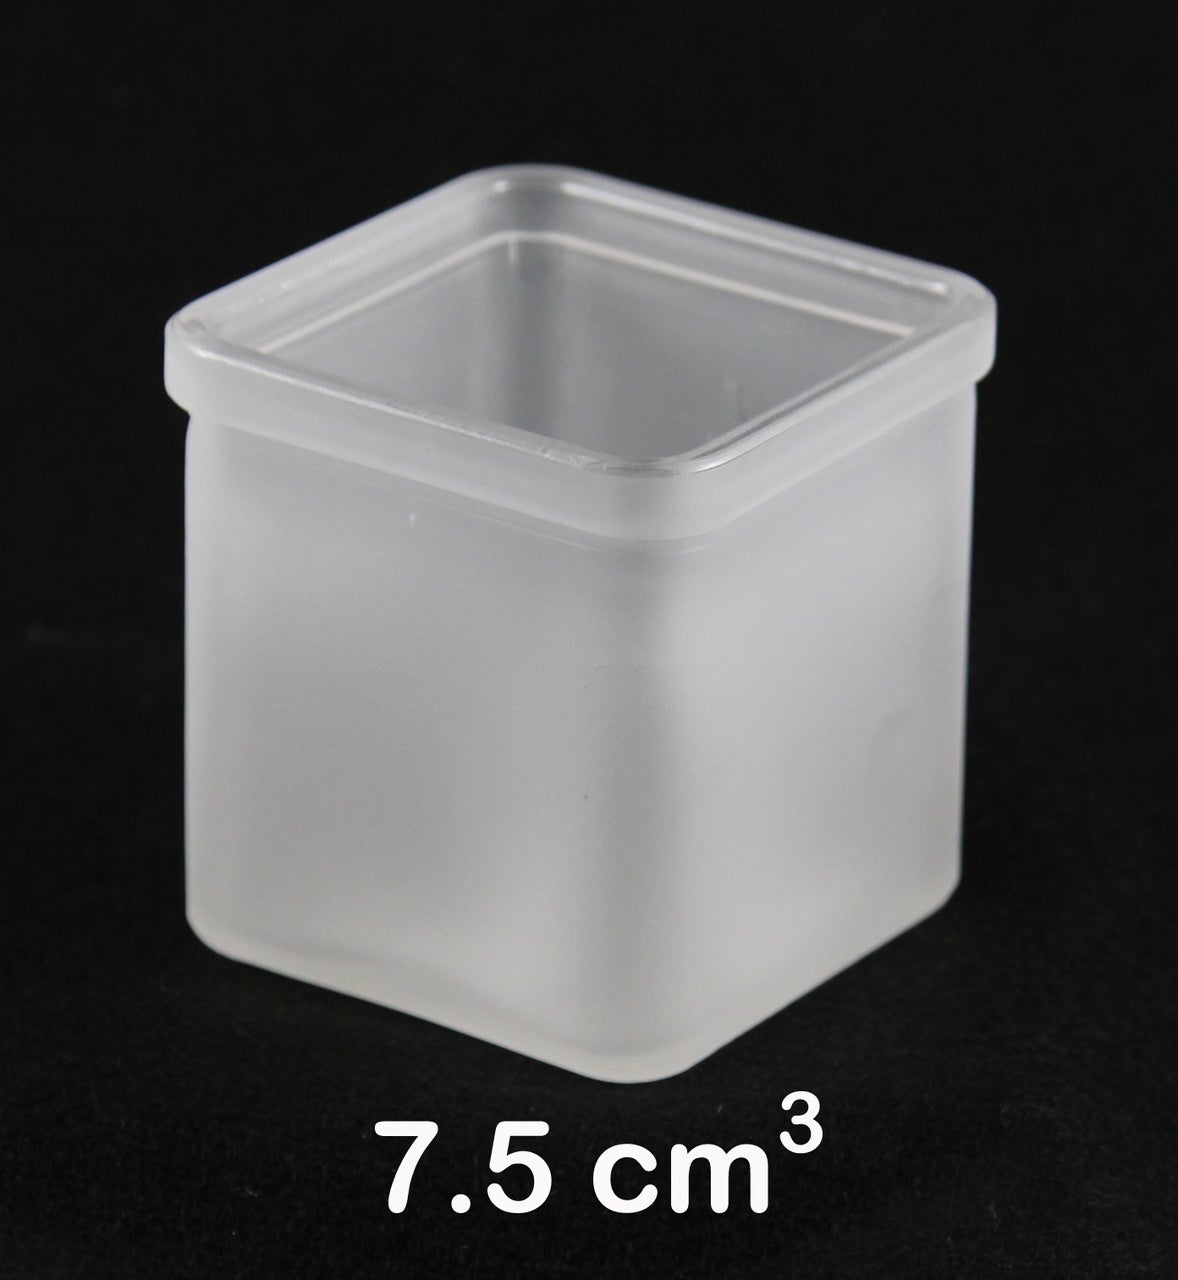 10 x Large Frosted Glass Square Tealight Candle Holder 7.5cm